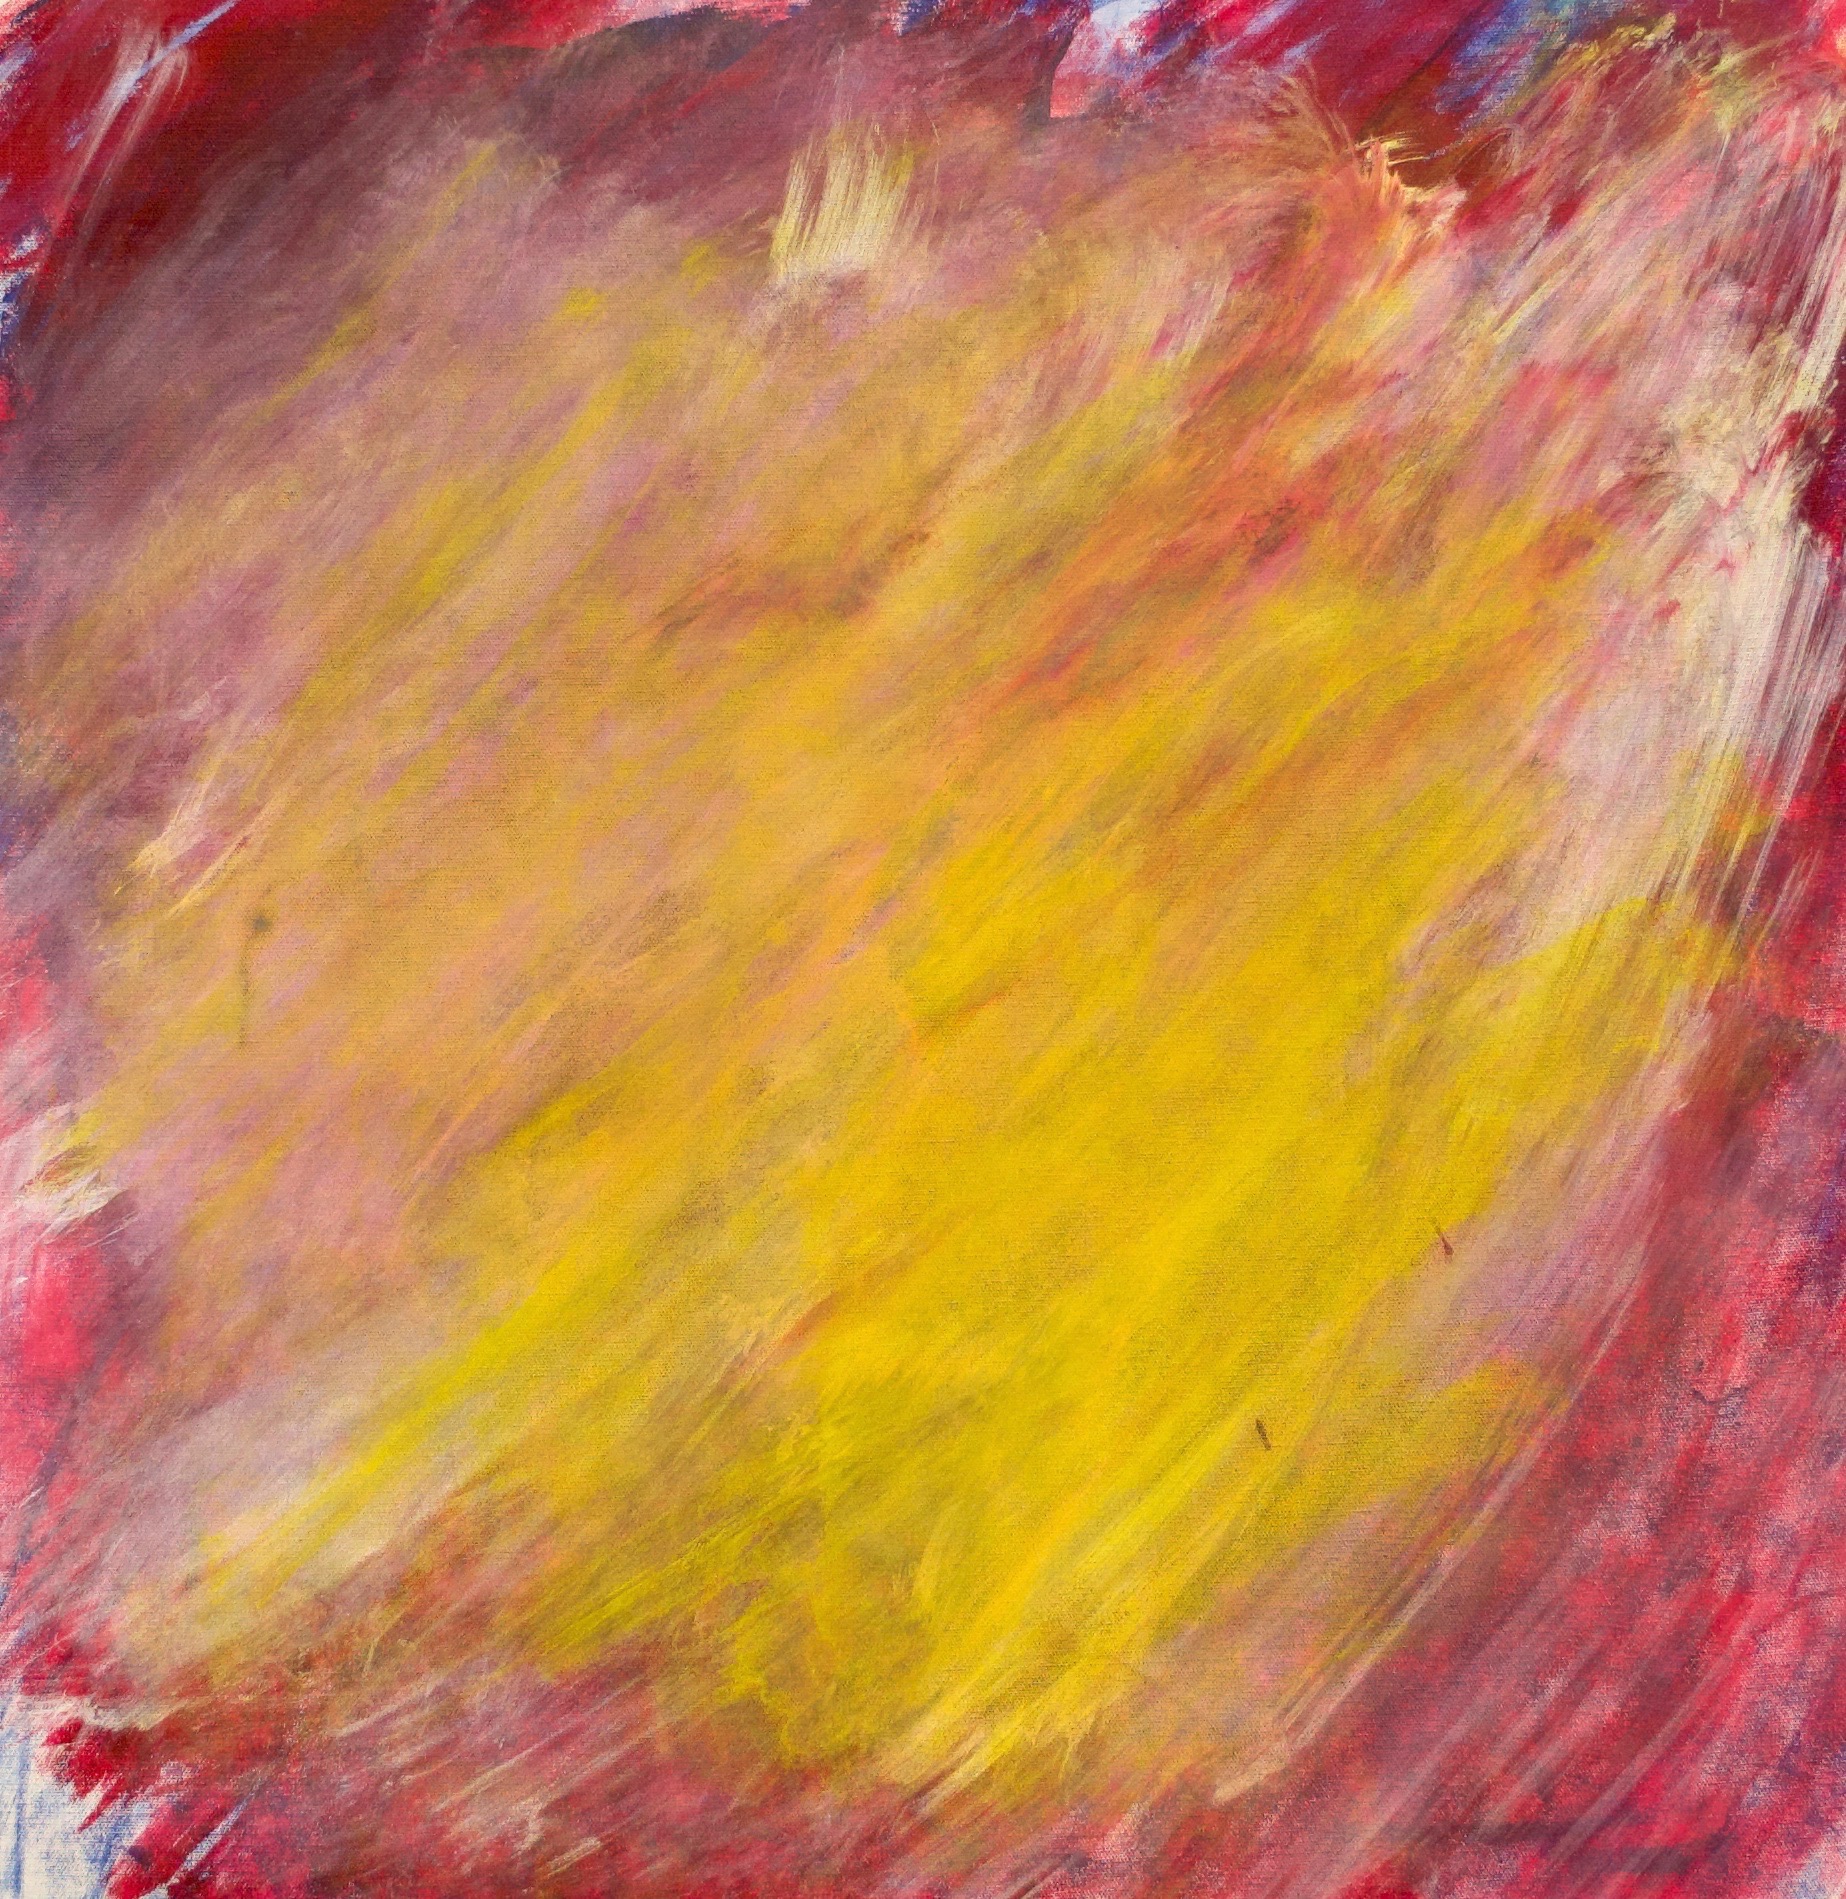 A blend of magenta, white, and yellow all going the same direction, from the bottom left to the top right of the canvas.